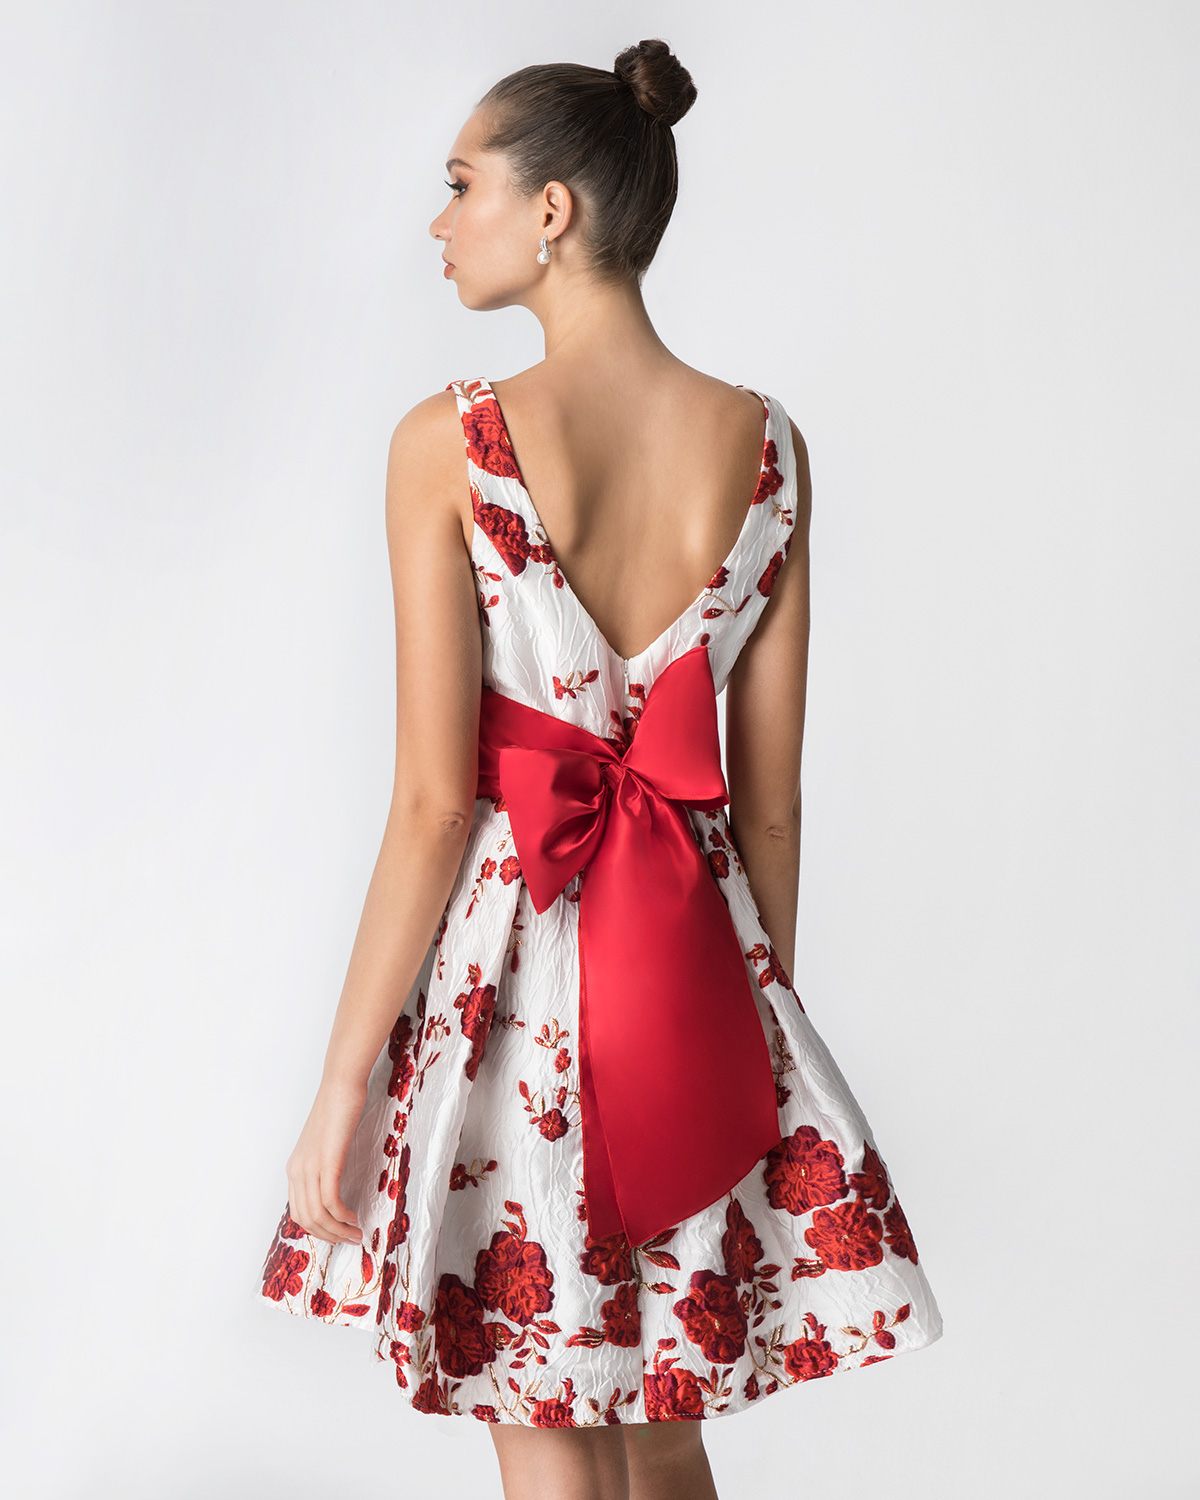 Cocktail Dresses / Short cocktail printed dress with a big bow on the back